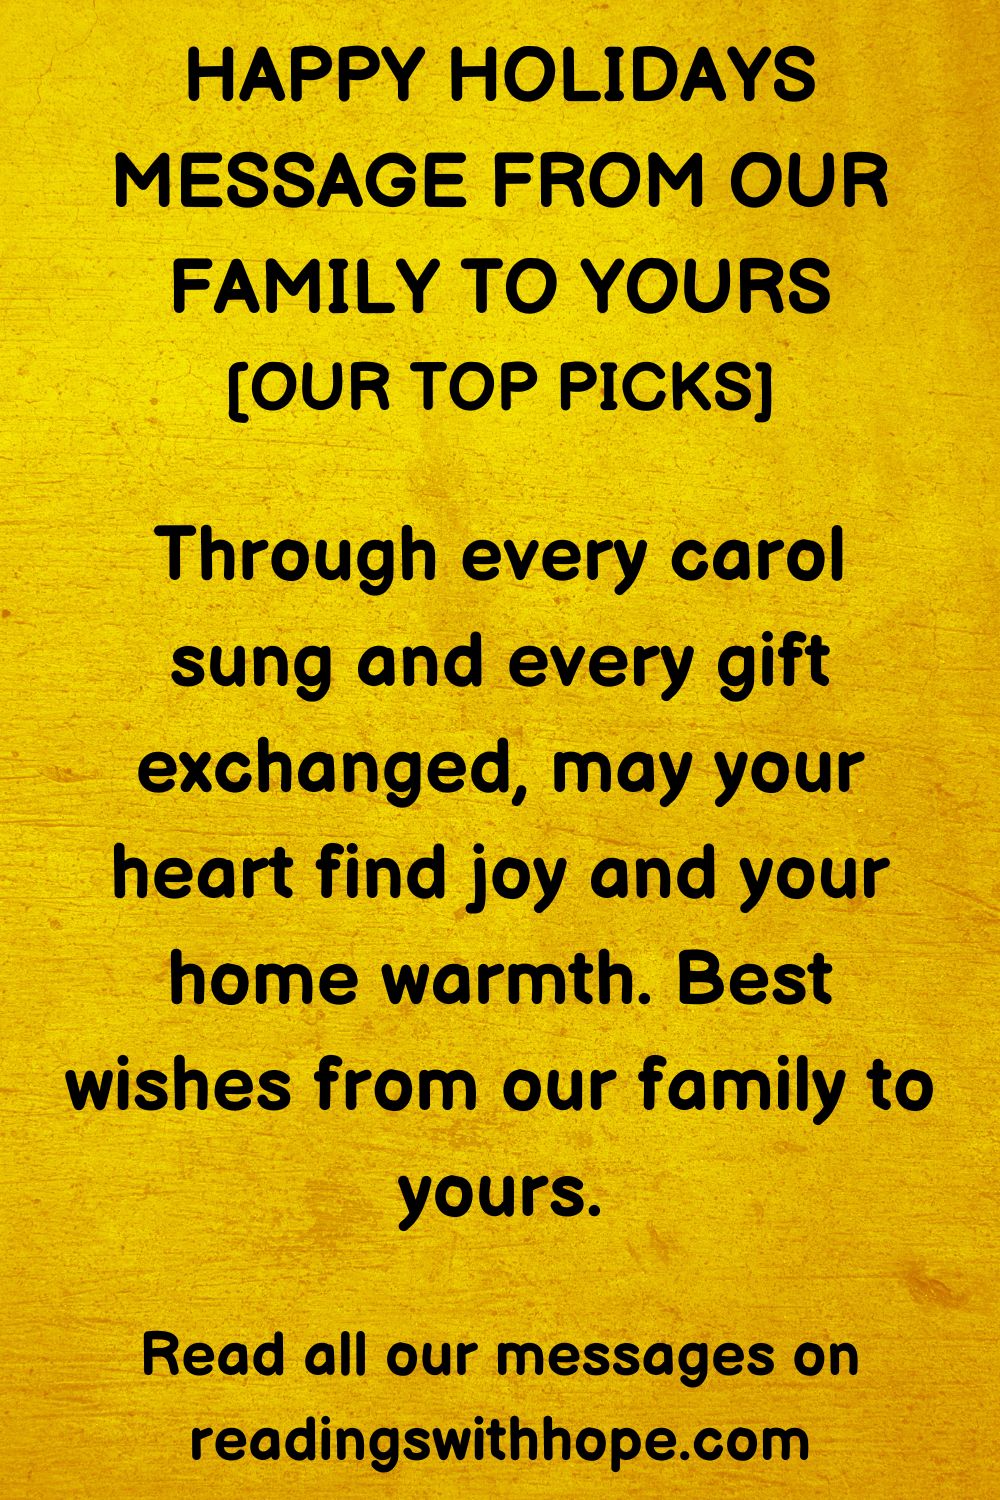 Happy Holidays Message From Our Family To Yours
